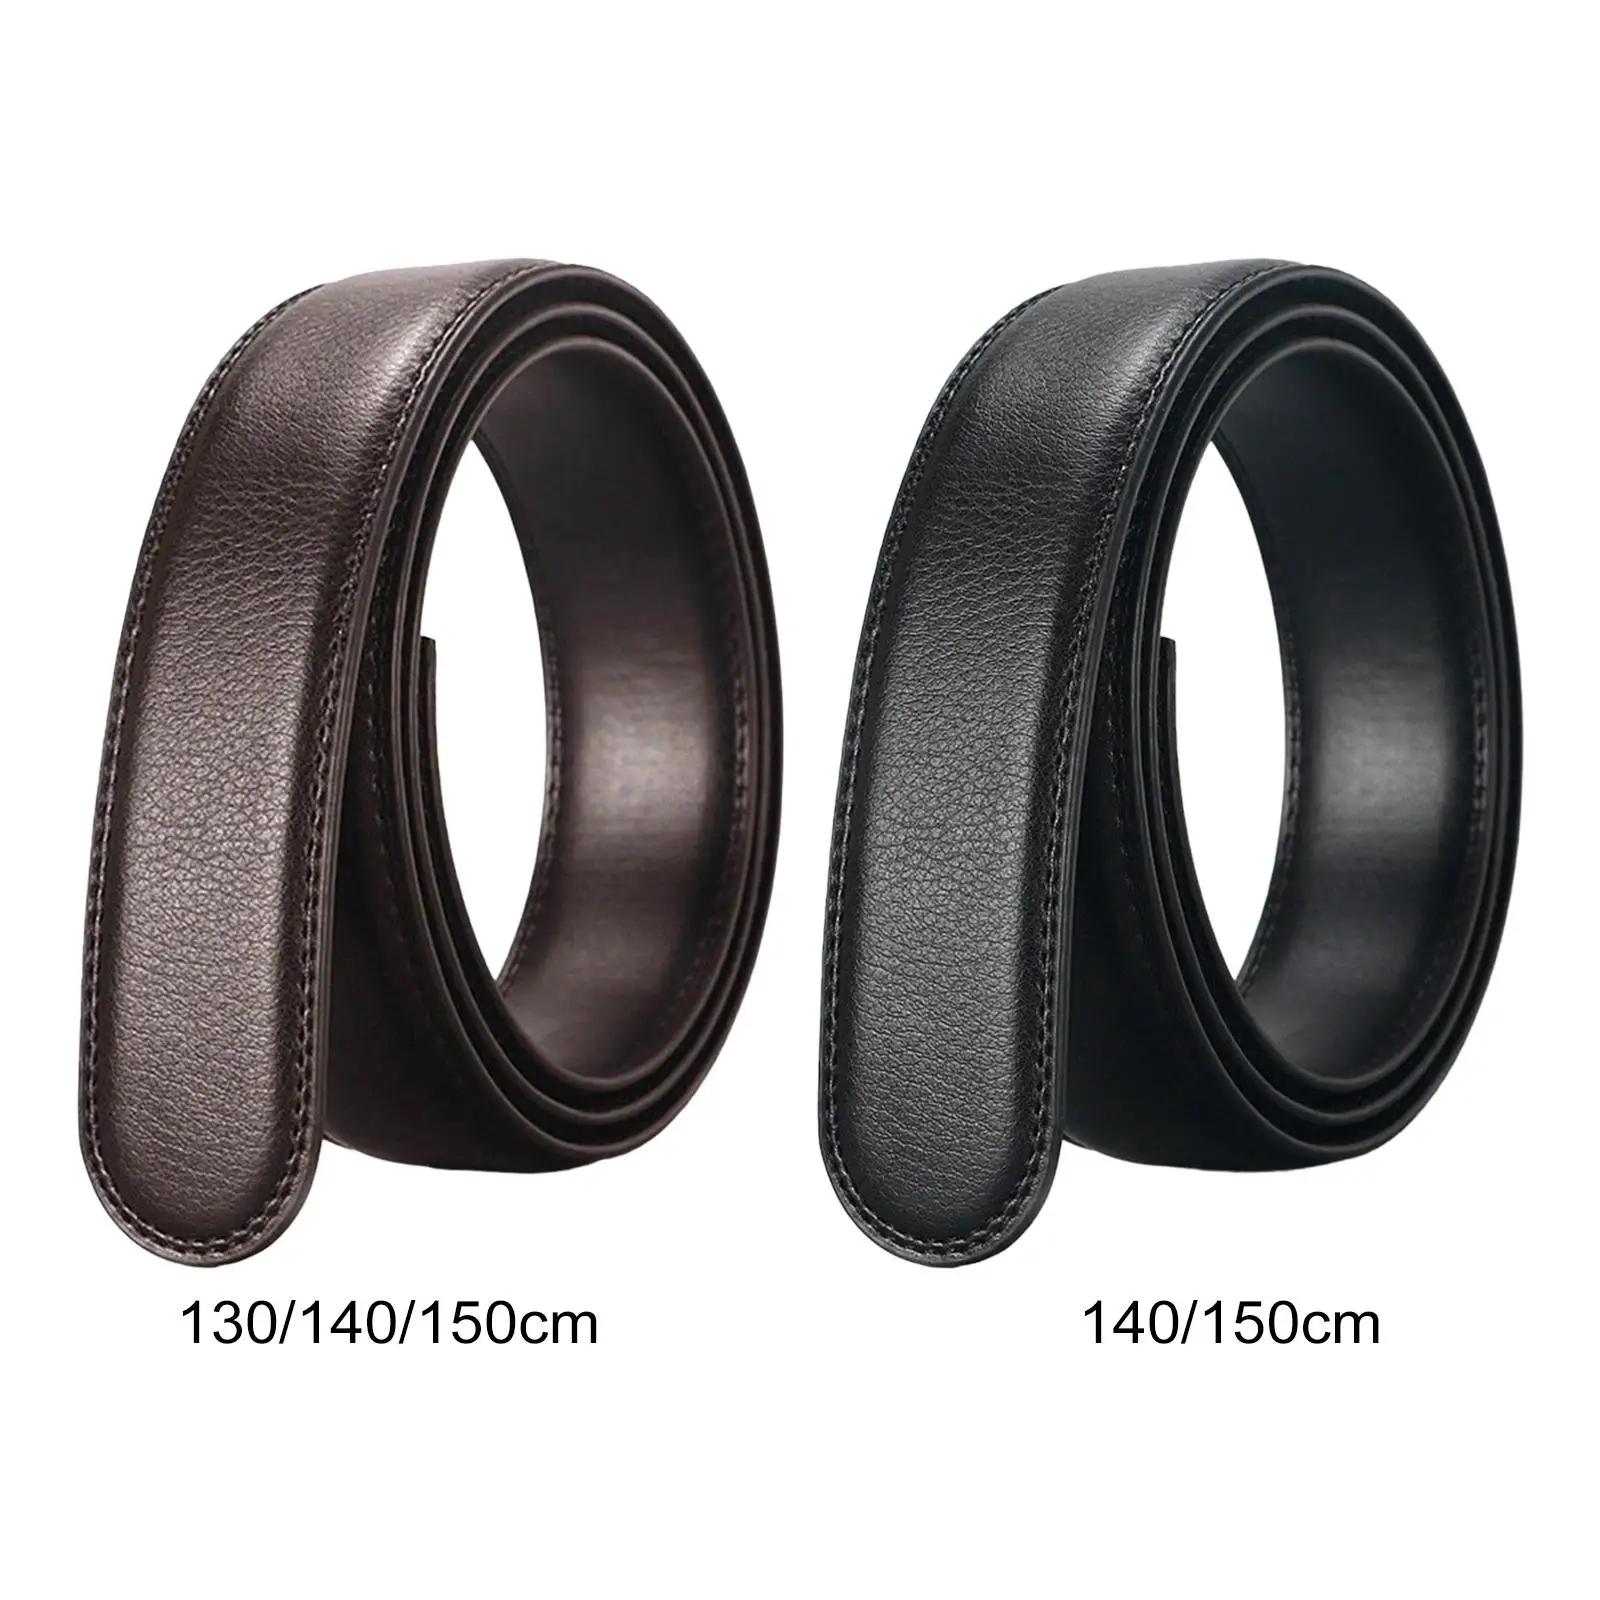 Automatic Belt No Buckle Formal Stylish Dress Belt Ratchet Belt Strap for Business Events Shopping Everyday Wear Dating Trousers